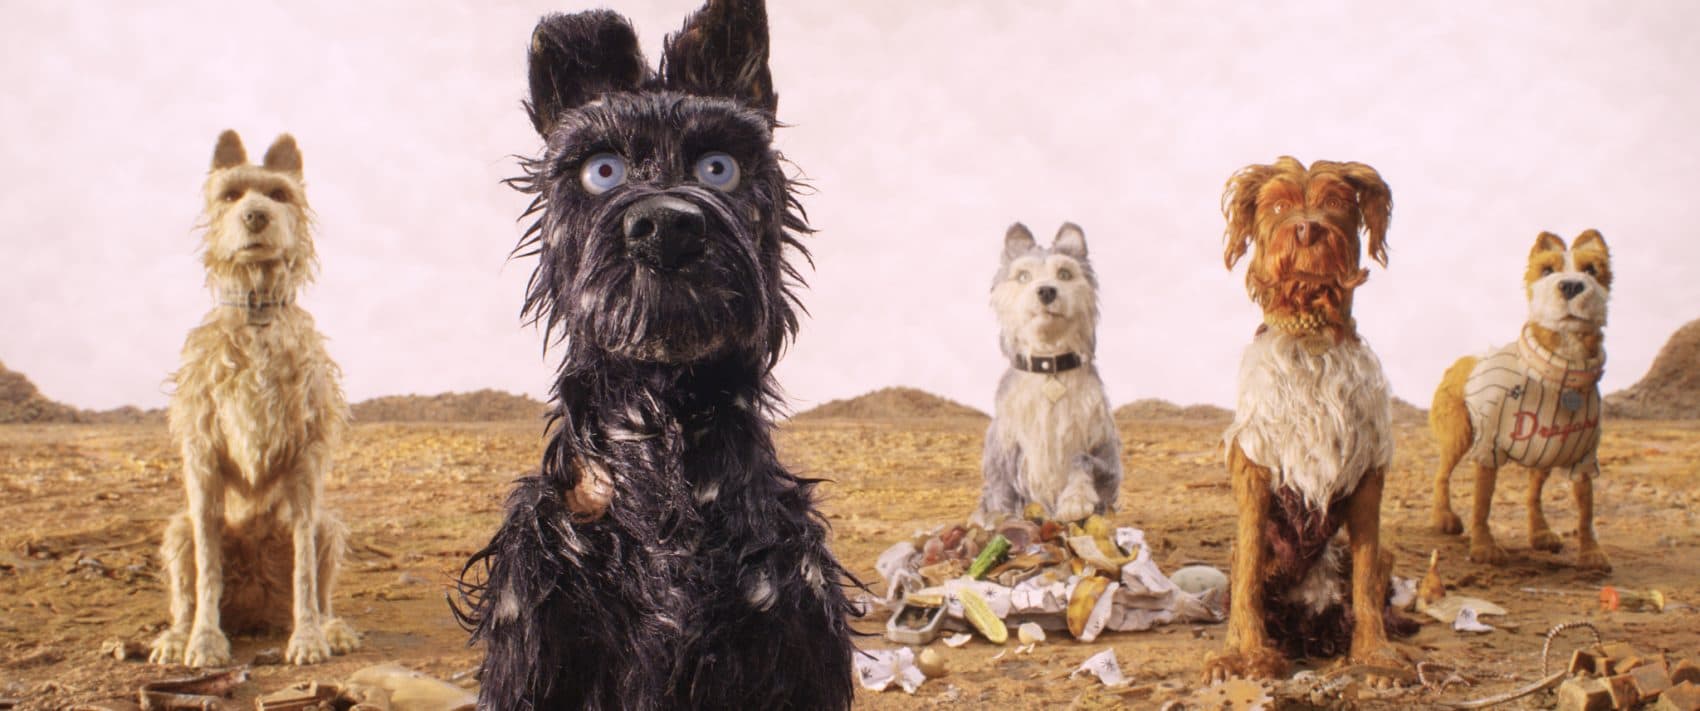 Left to right, Edward Norton voices Rex, Bryan Cranston voices Chief, Jeff Goldblum voices Duke, Bob Balaban voices King and Bill Murray voices Boss in Wes Anderson’s “Isle of Dogs.” (Courtesy Fox Searchlight Pictures)